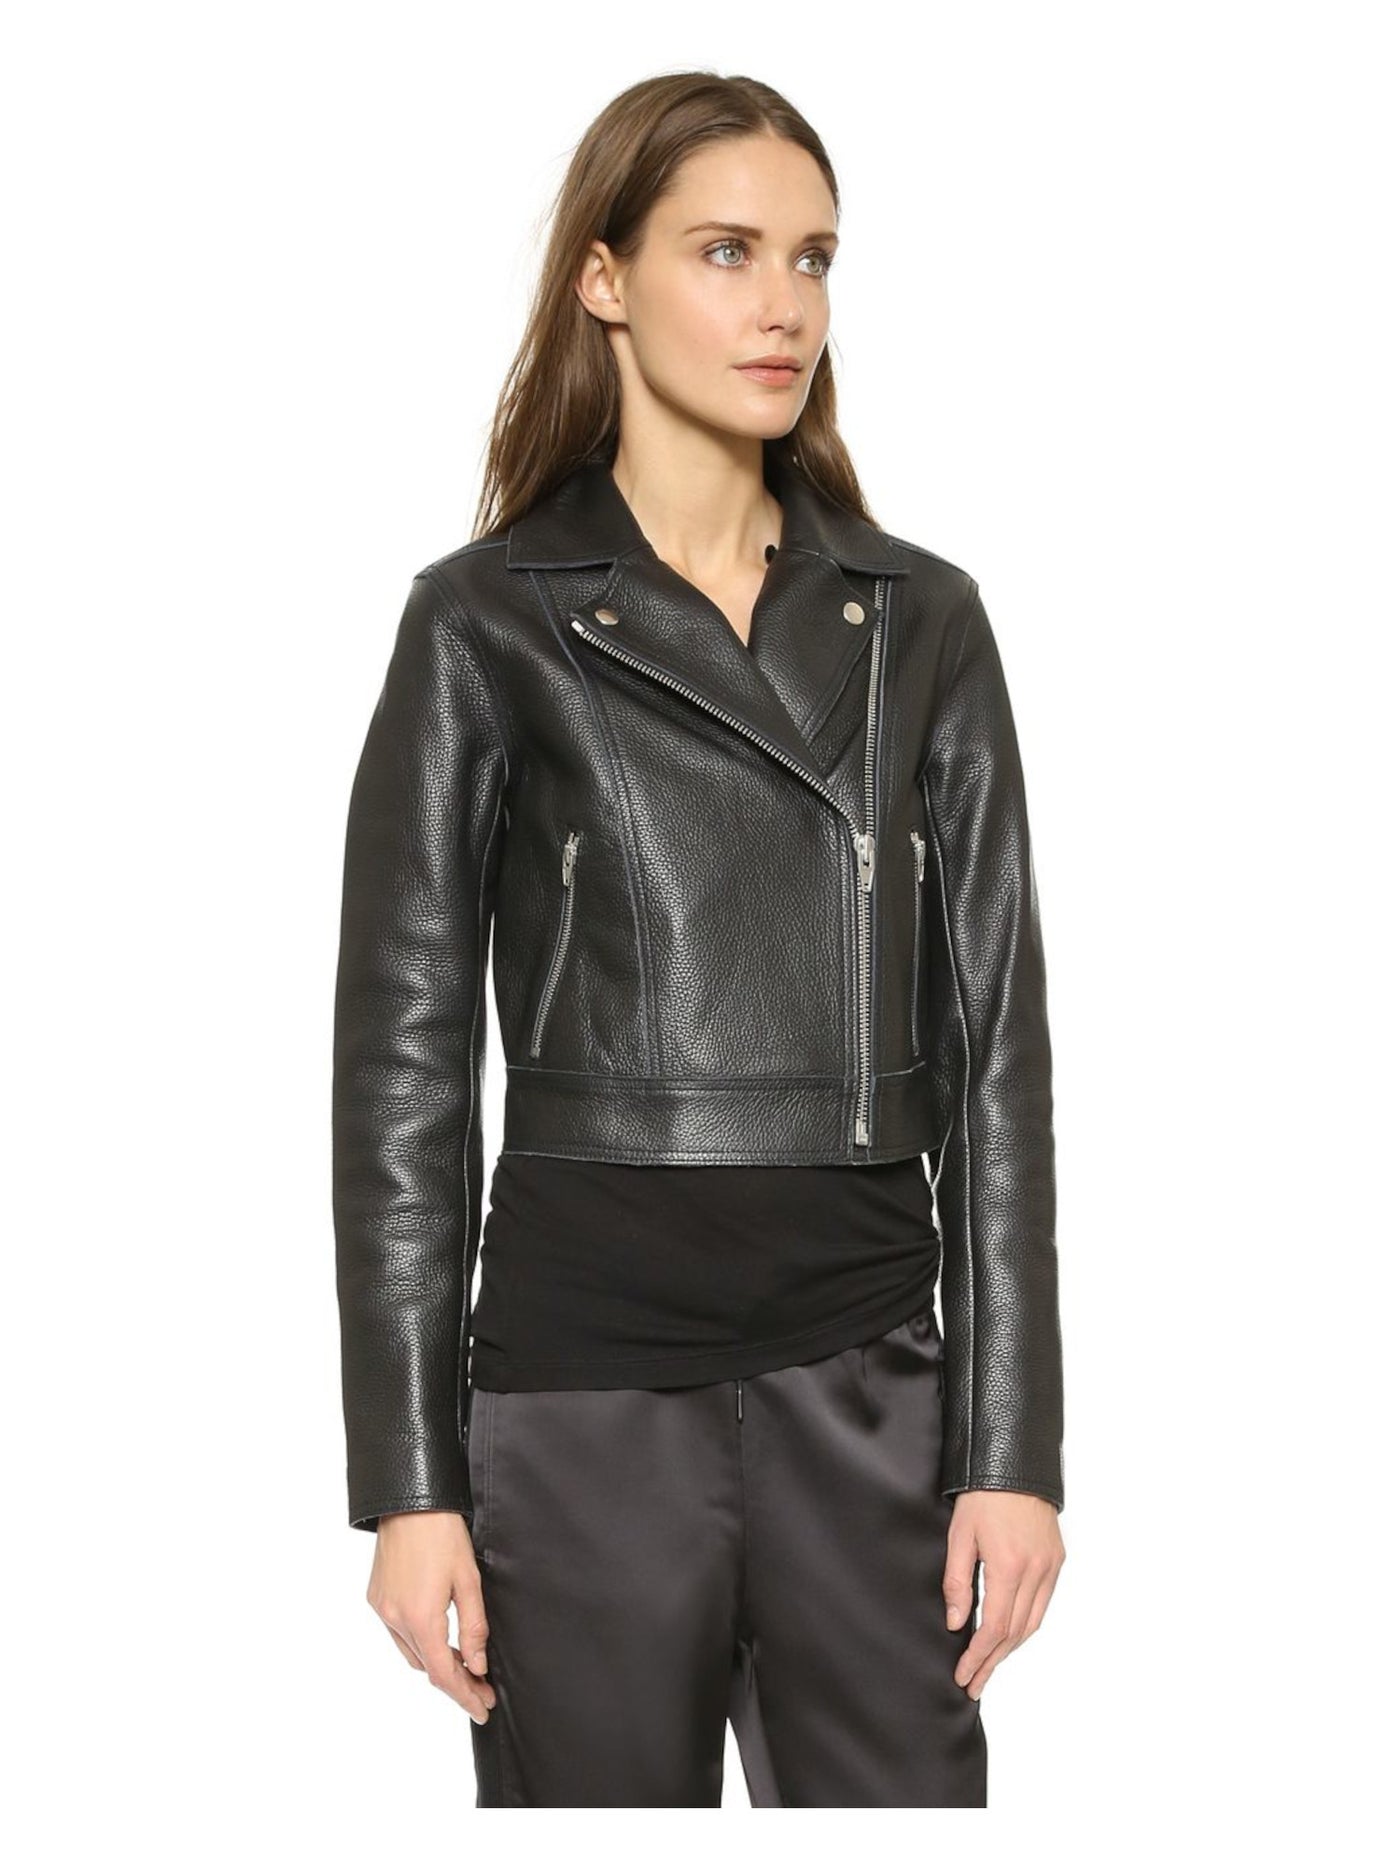 ALEXANDER WANG Womens Black Zippered Pocketed Asymmetrical Lined Motorcycle Jacket 2